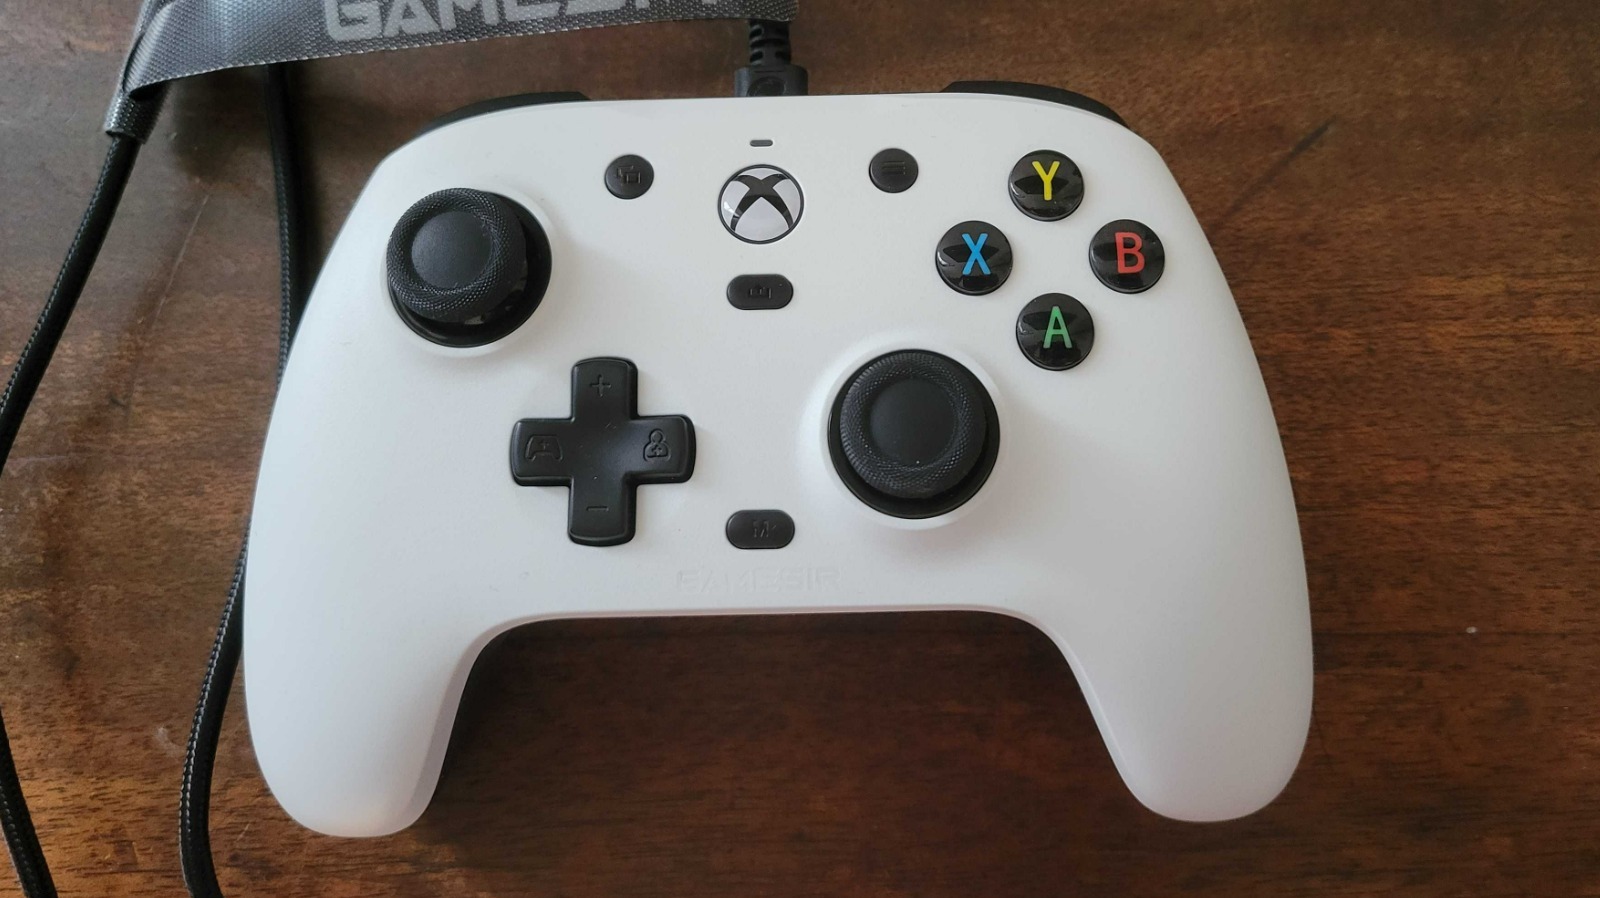 GameSir G7 SE Wired Controller Review